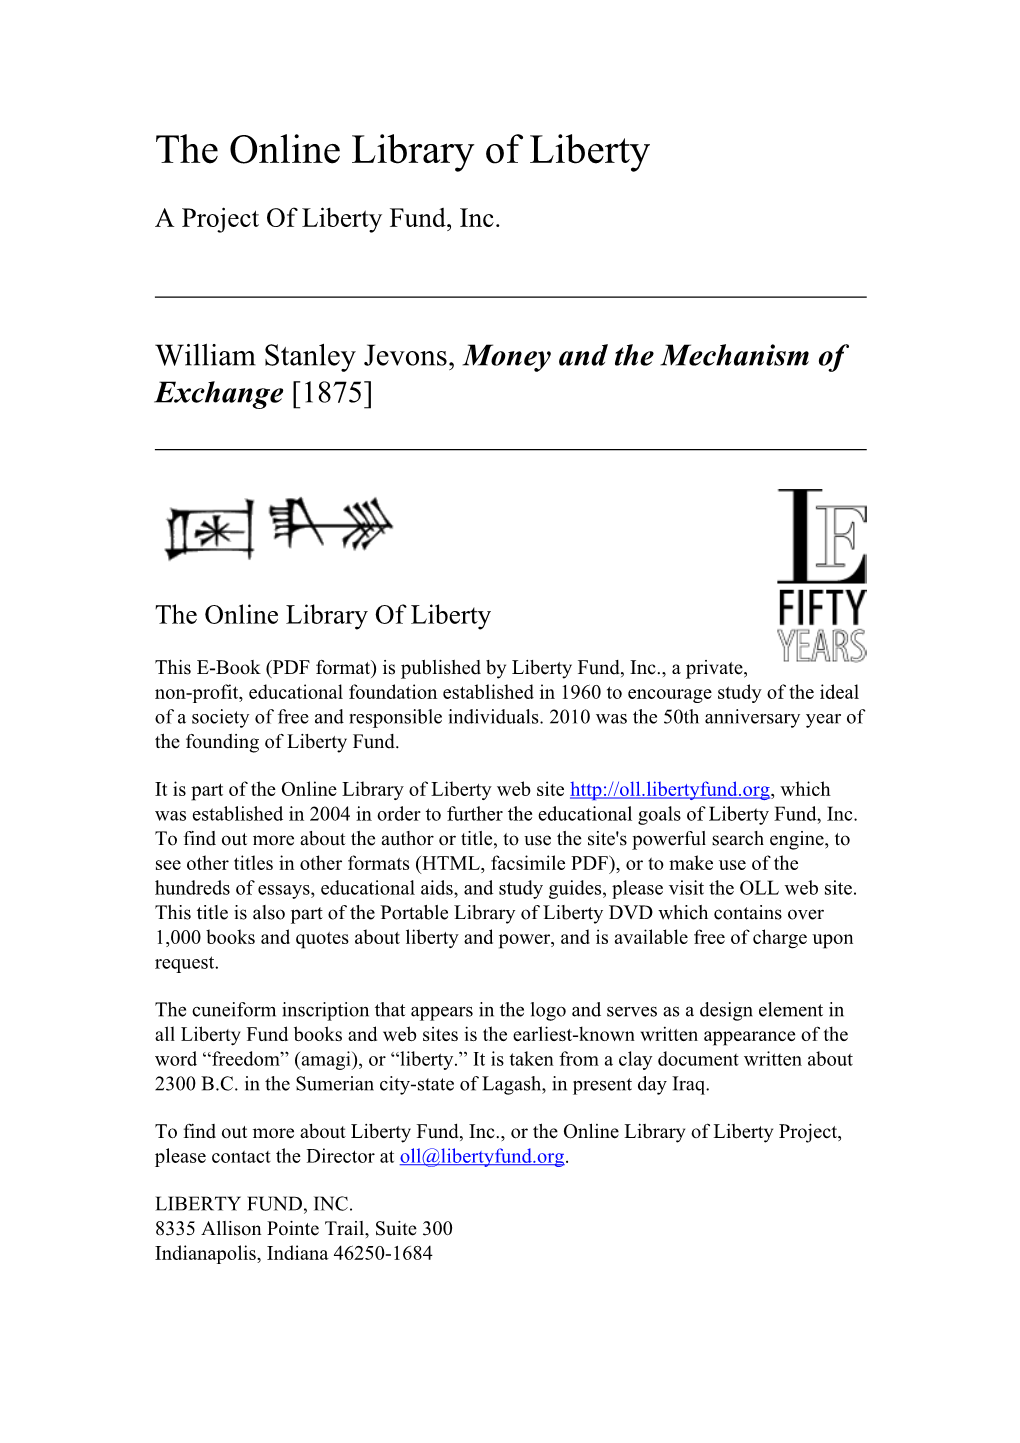 Online Library of Liberty: Money and the Mechanism of Exchange